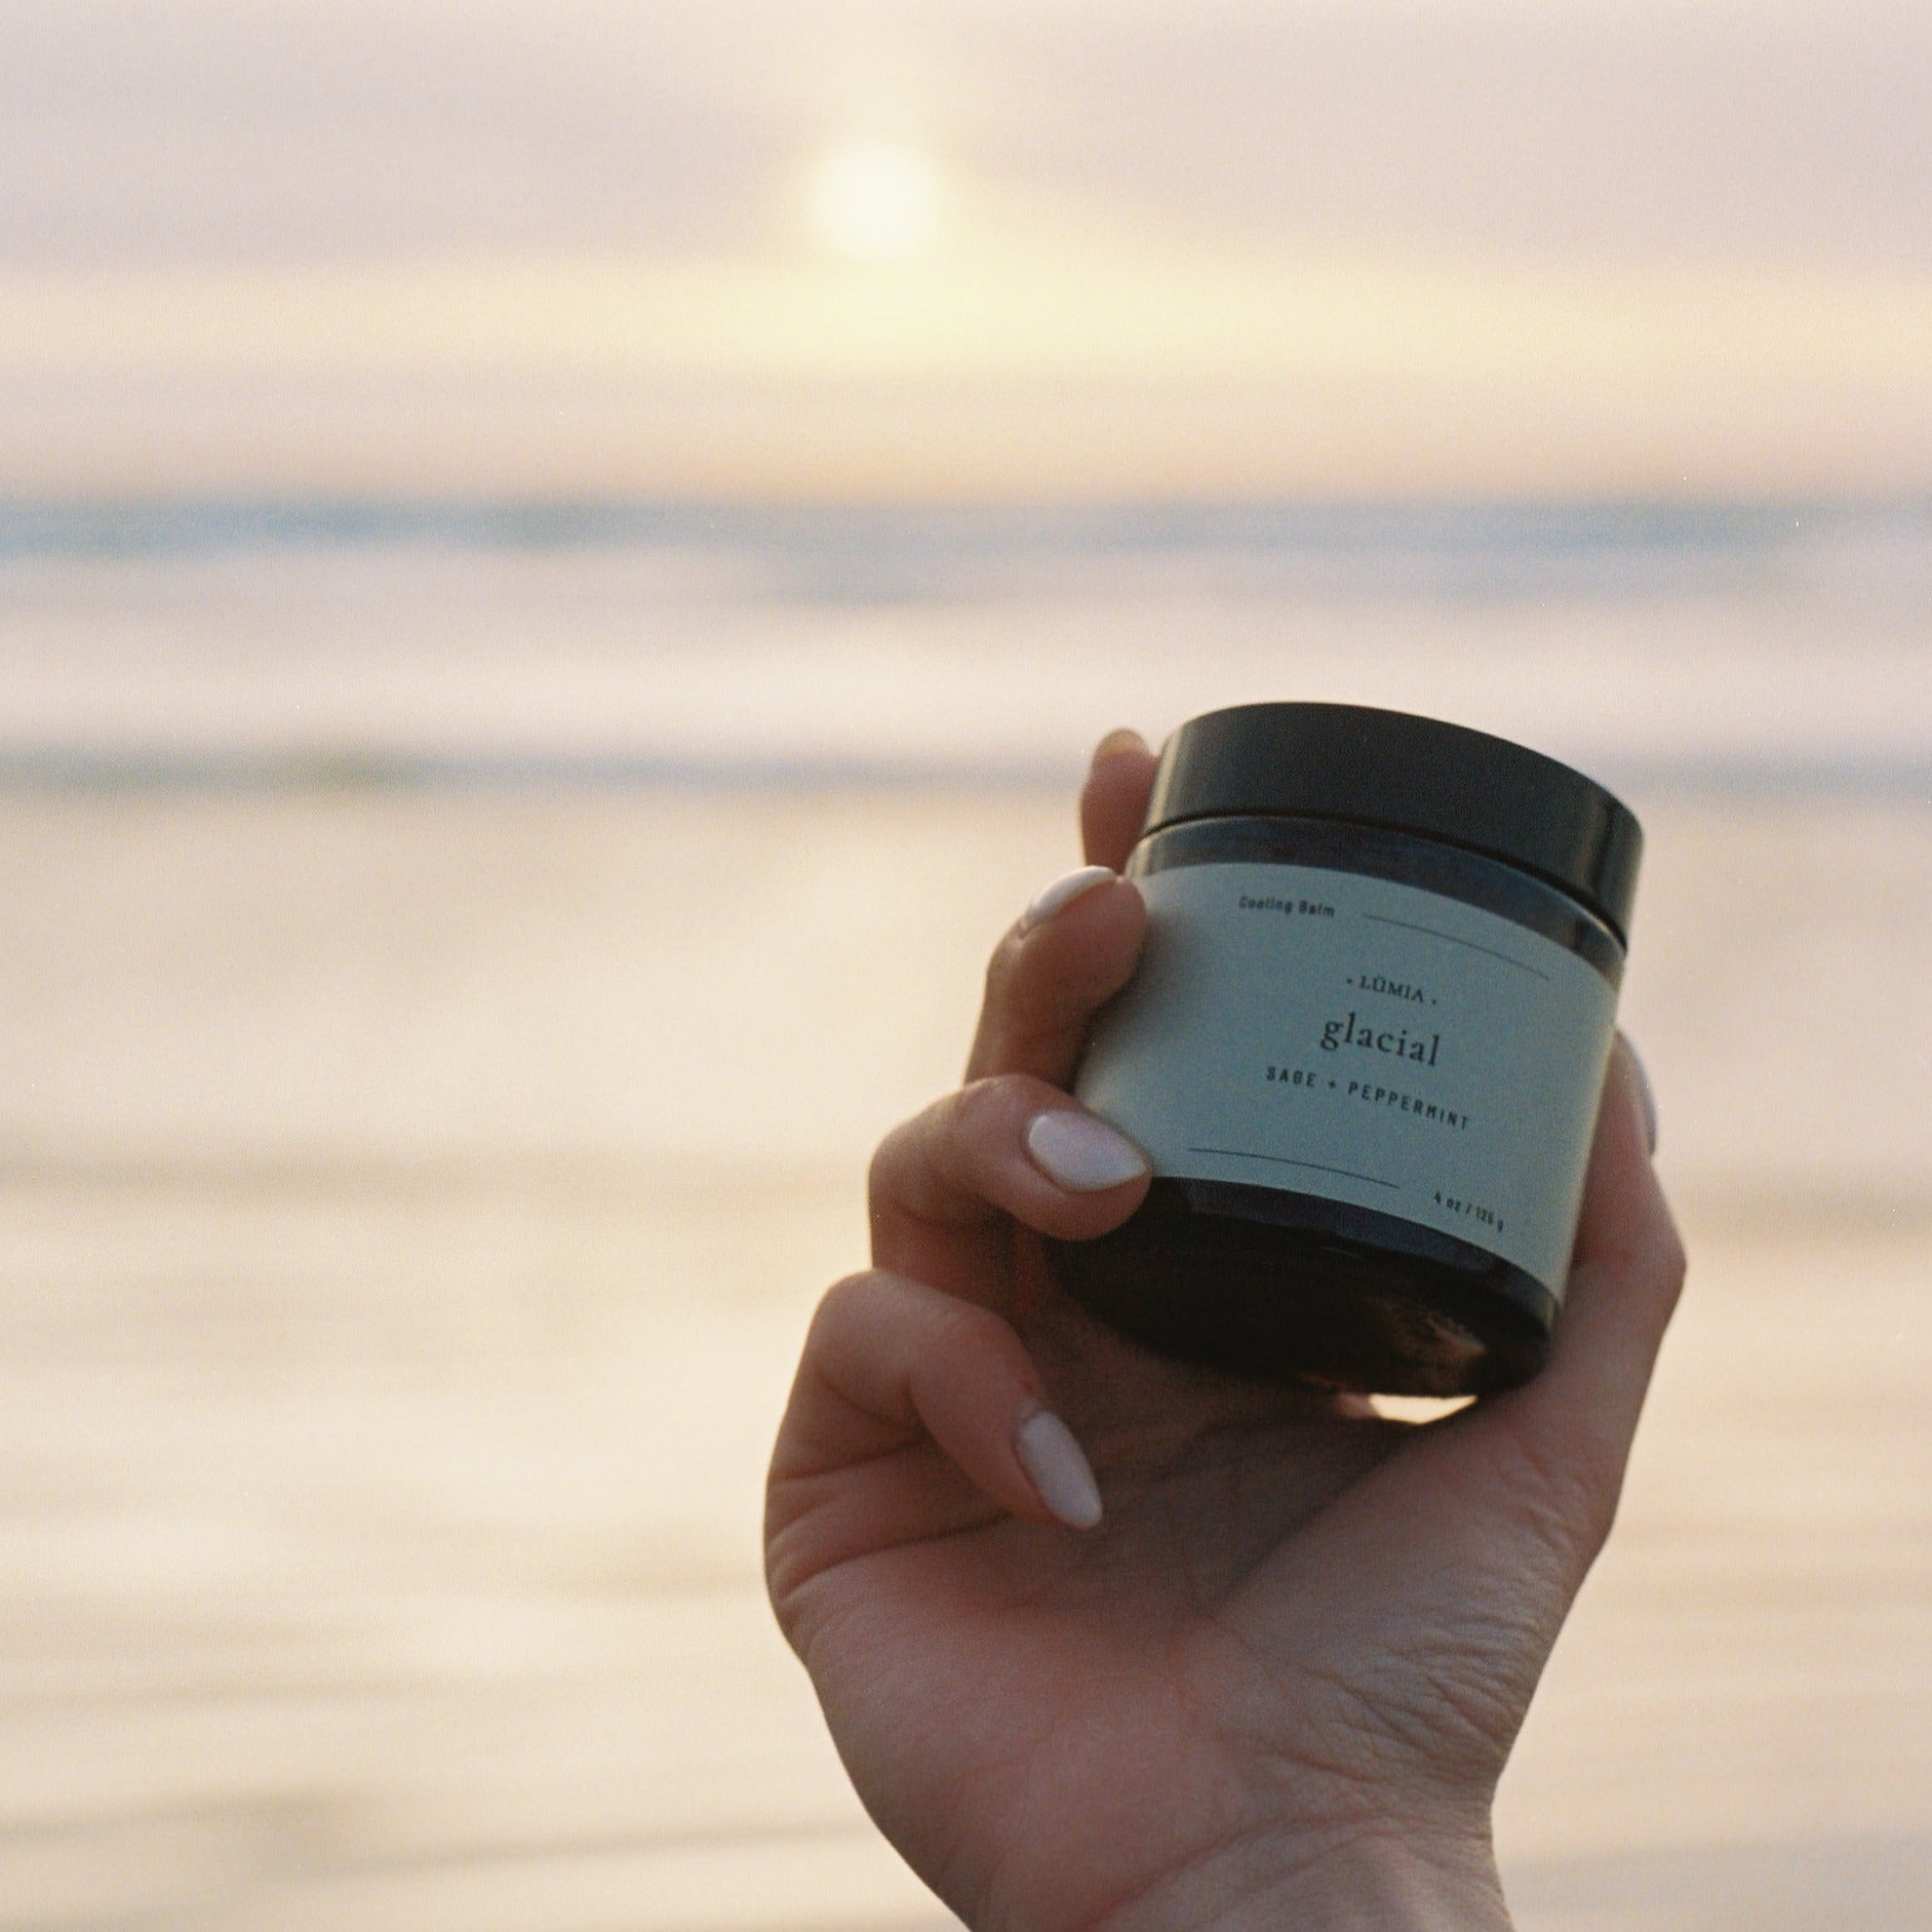 Herbal Oil Infusion, Glacial Cooling Balm held out over ocean sunset